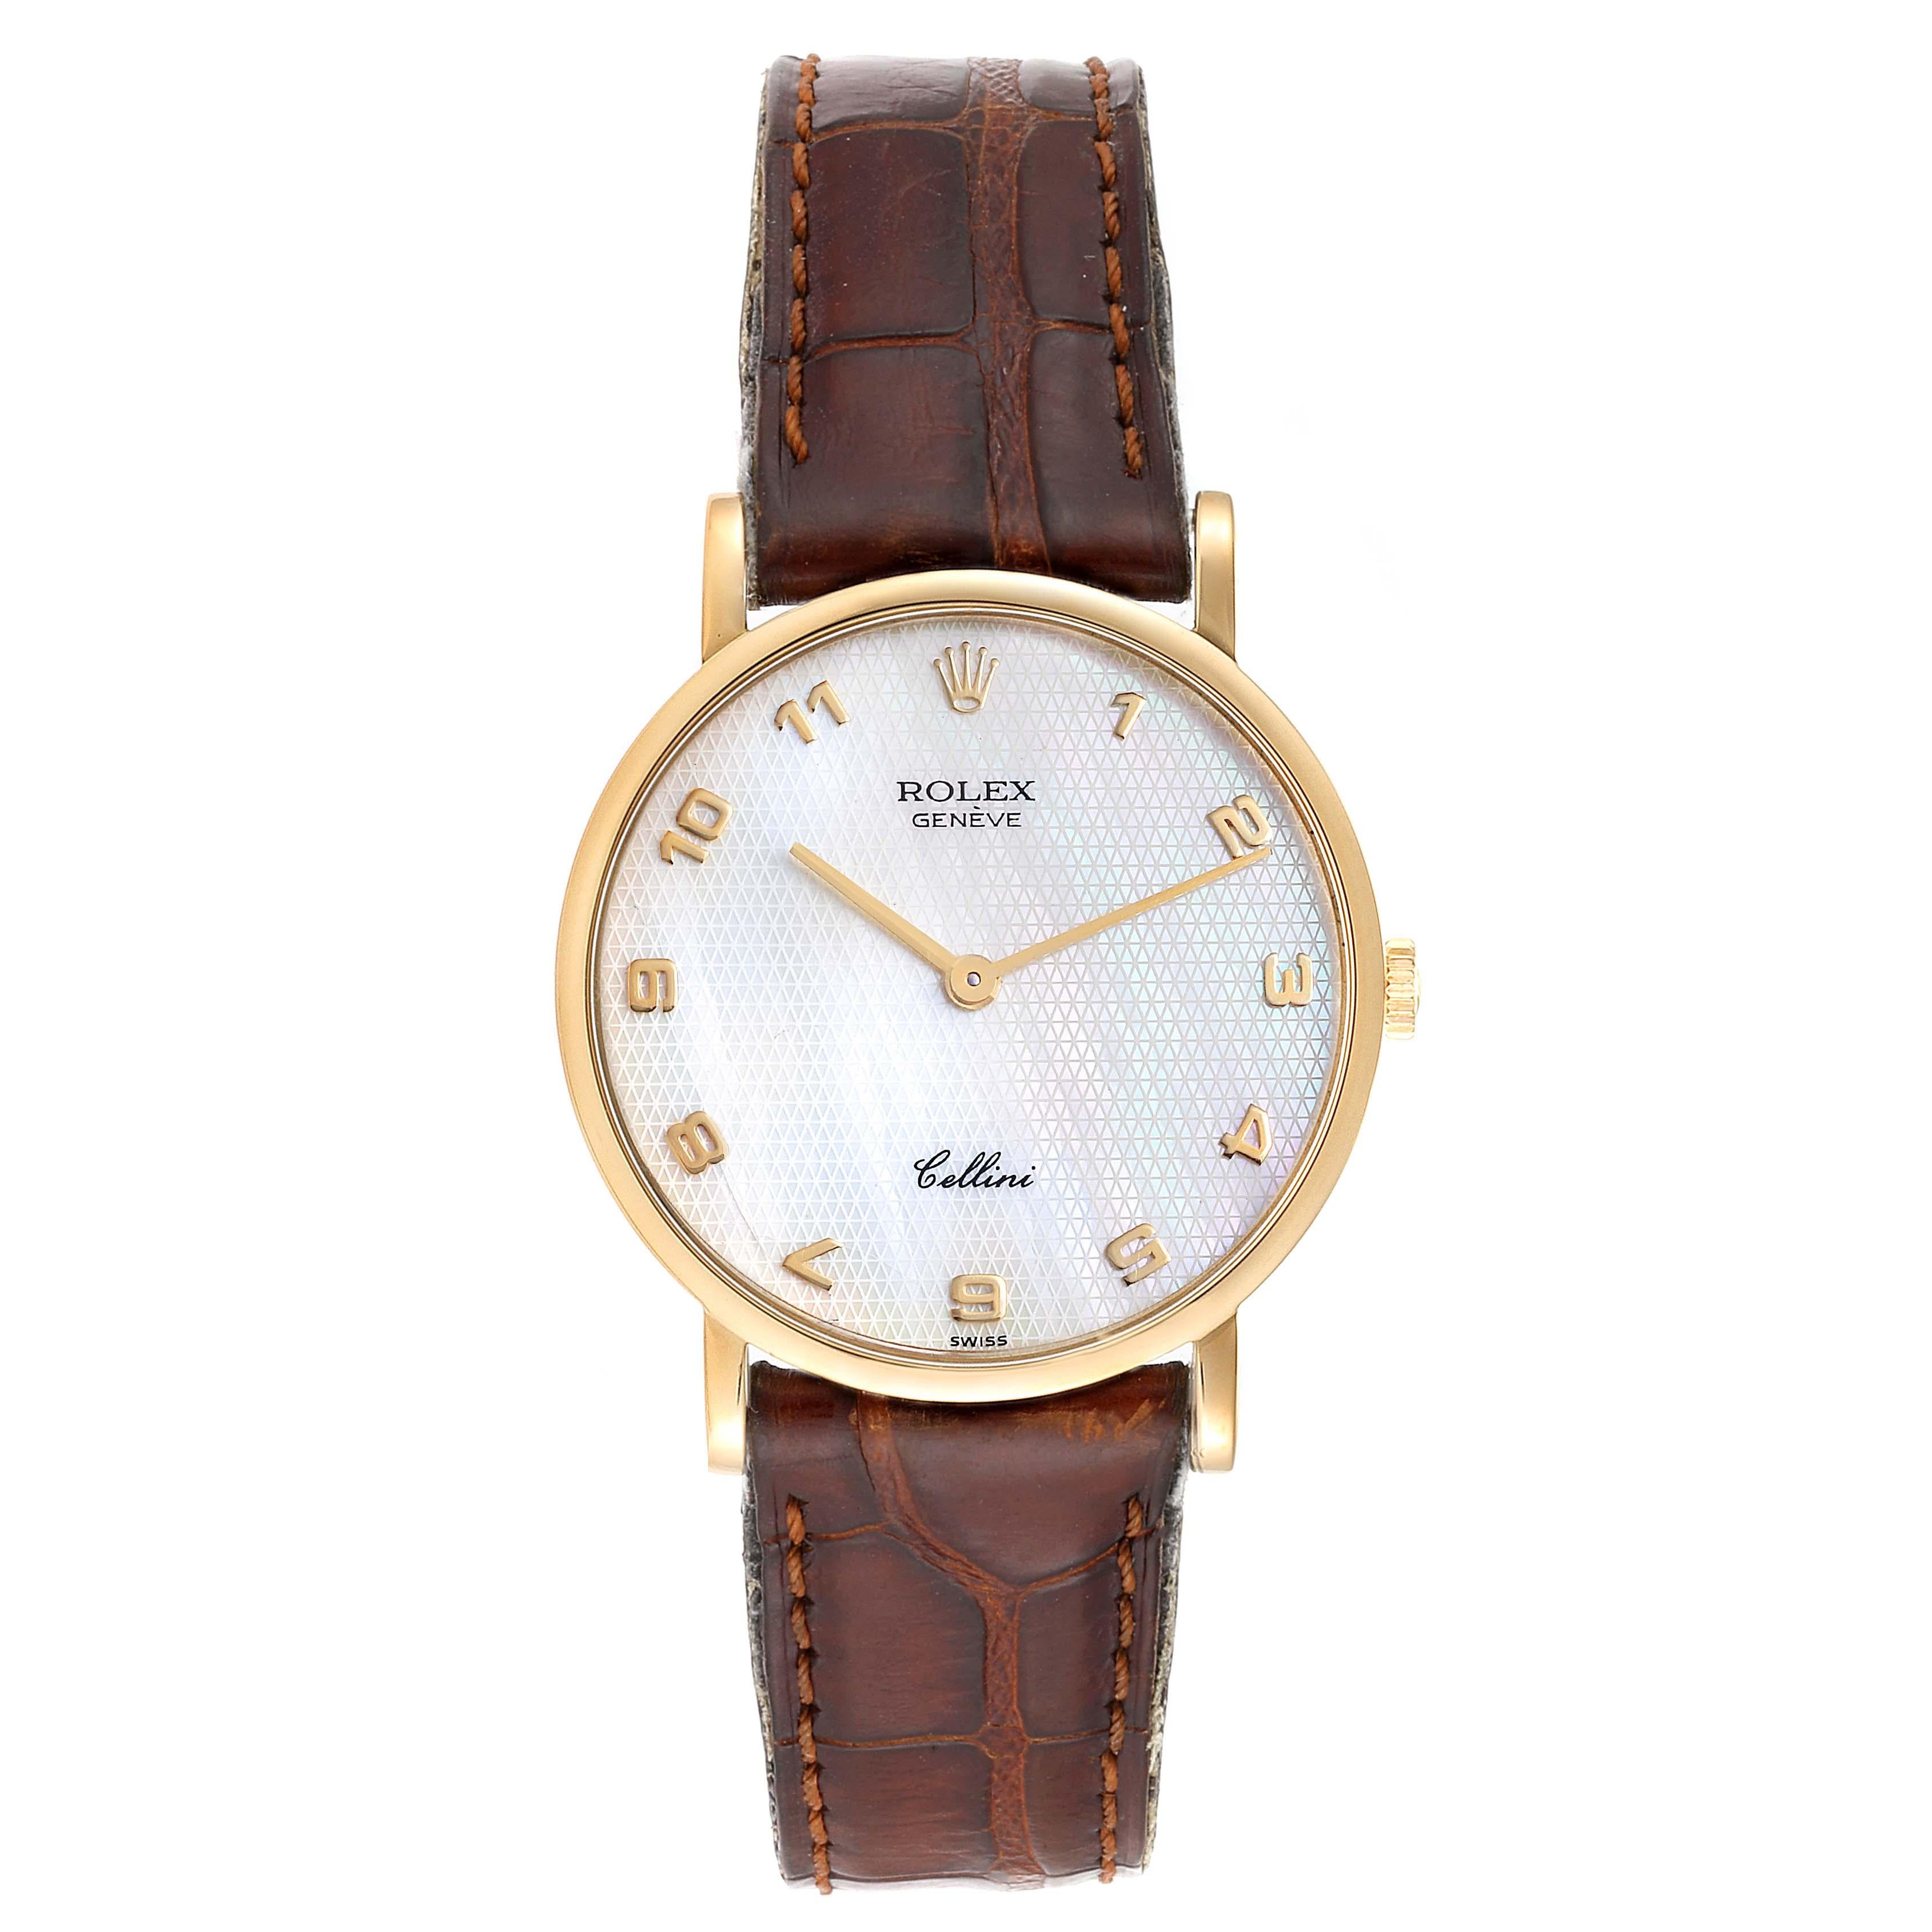 Rolex Cellini Classic Yellow Gold Mother Of Pearl Unisex Watch 5112. Manual winding movement. 18k yellow gold slim case 32.0 mm in diameter. . Scratch resistant sapphire crystal. Flat profile. Textured mother of pearl dial with raised gold arabic